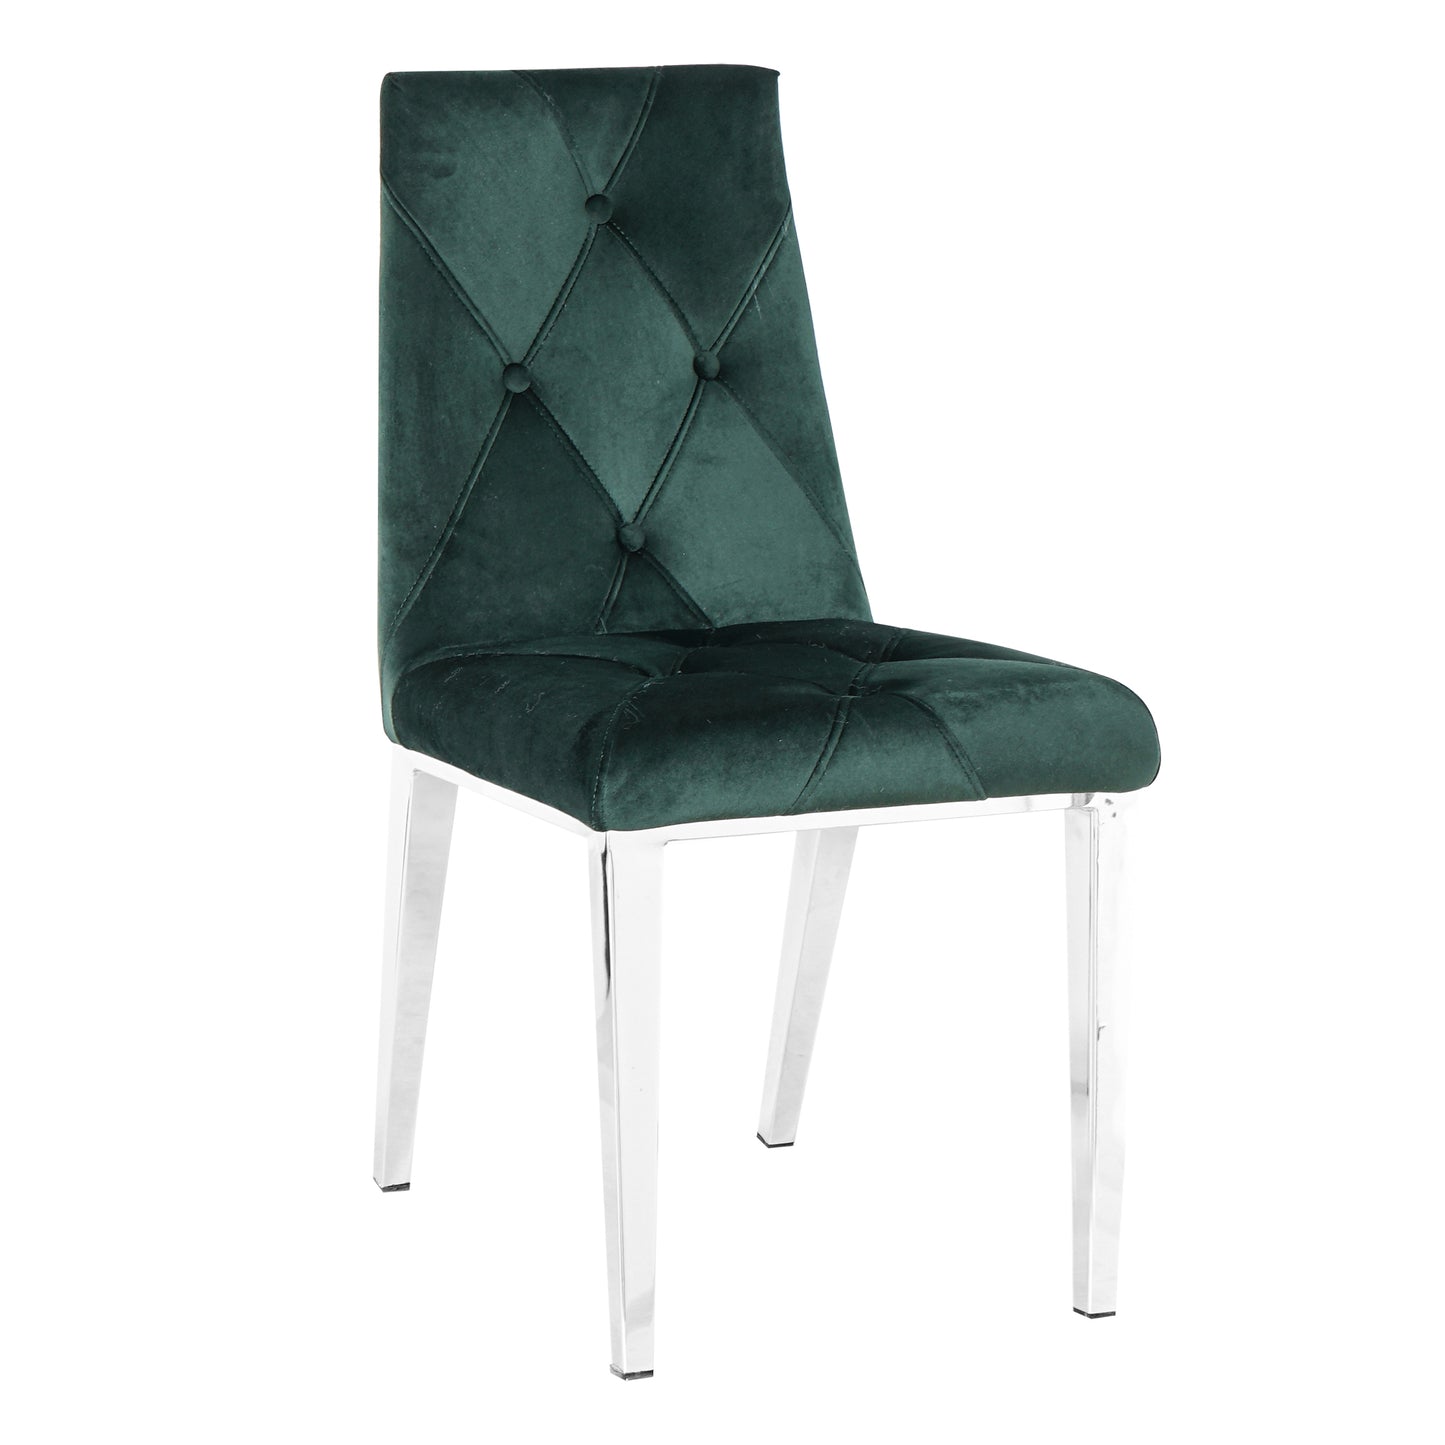 Velvet Tufted Dining Chairs  Set of 2 W21037587